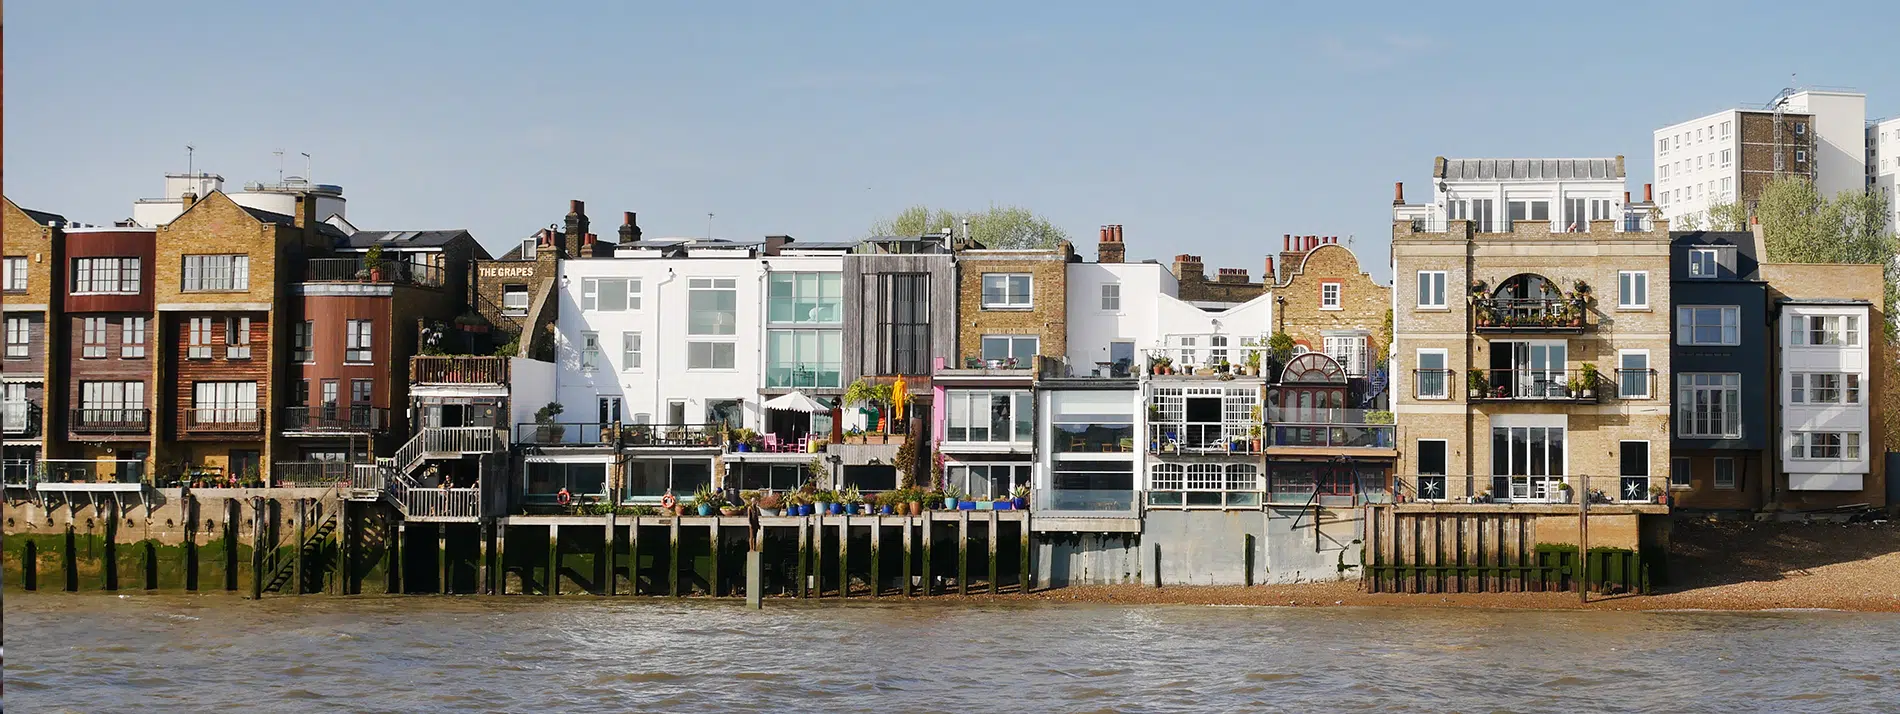 Top 10 Places to Live in the UK - houses in London on the Thames